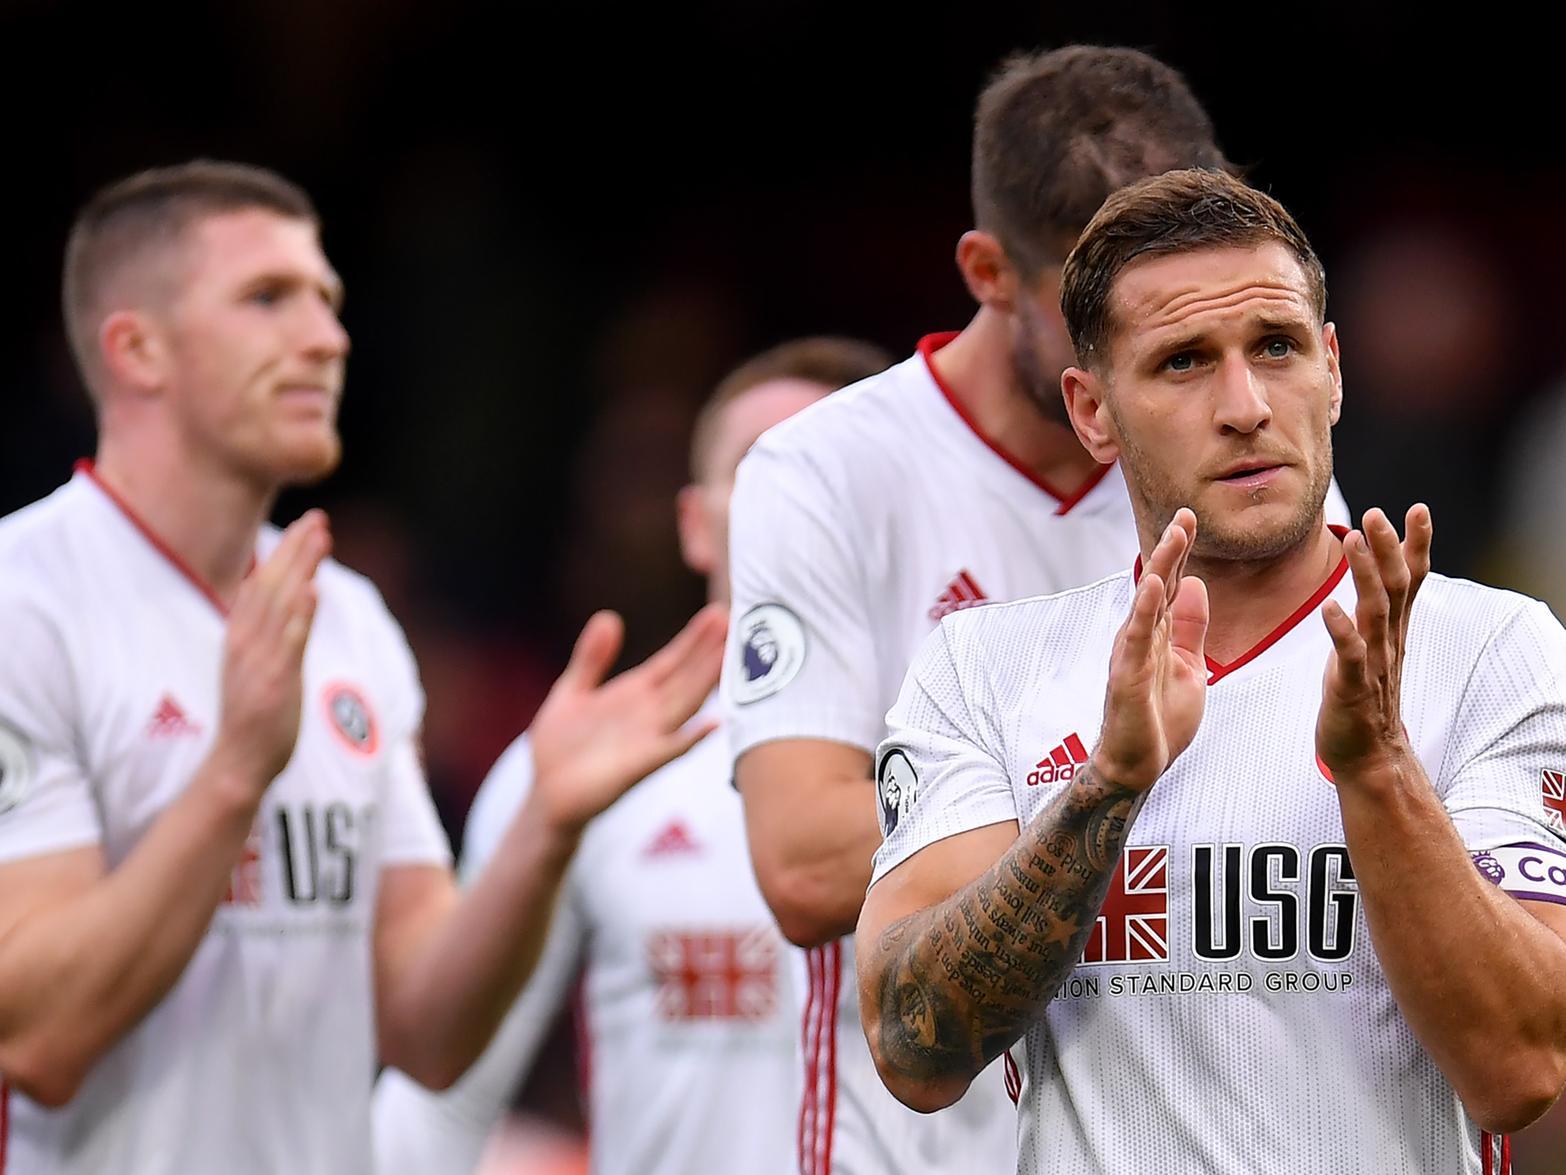 Sheffield United ace Billy Sharp is said to have rejected moves to both Nottingham Forest and Celtic, amid speculation of a move away from Bramall Lane. (Daily Star)